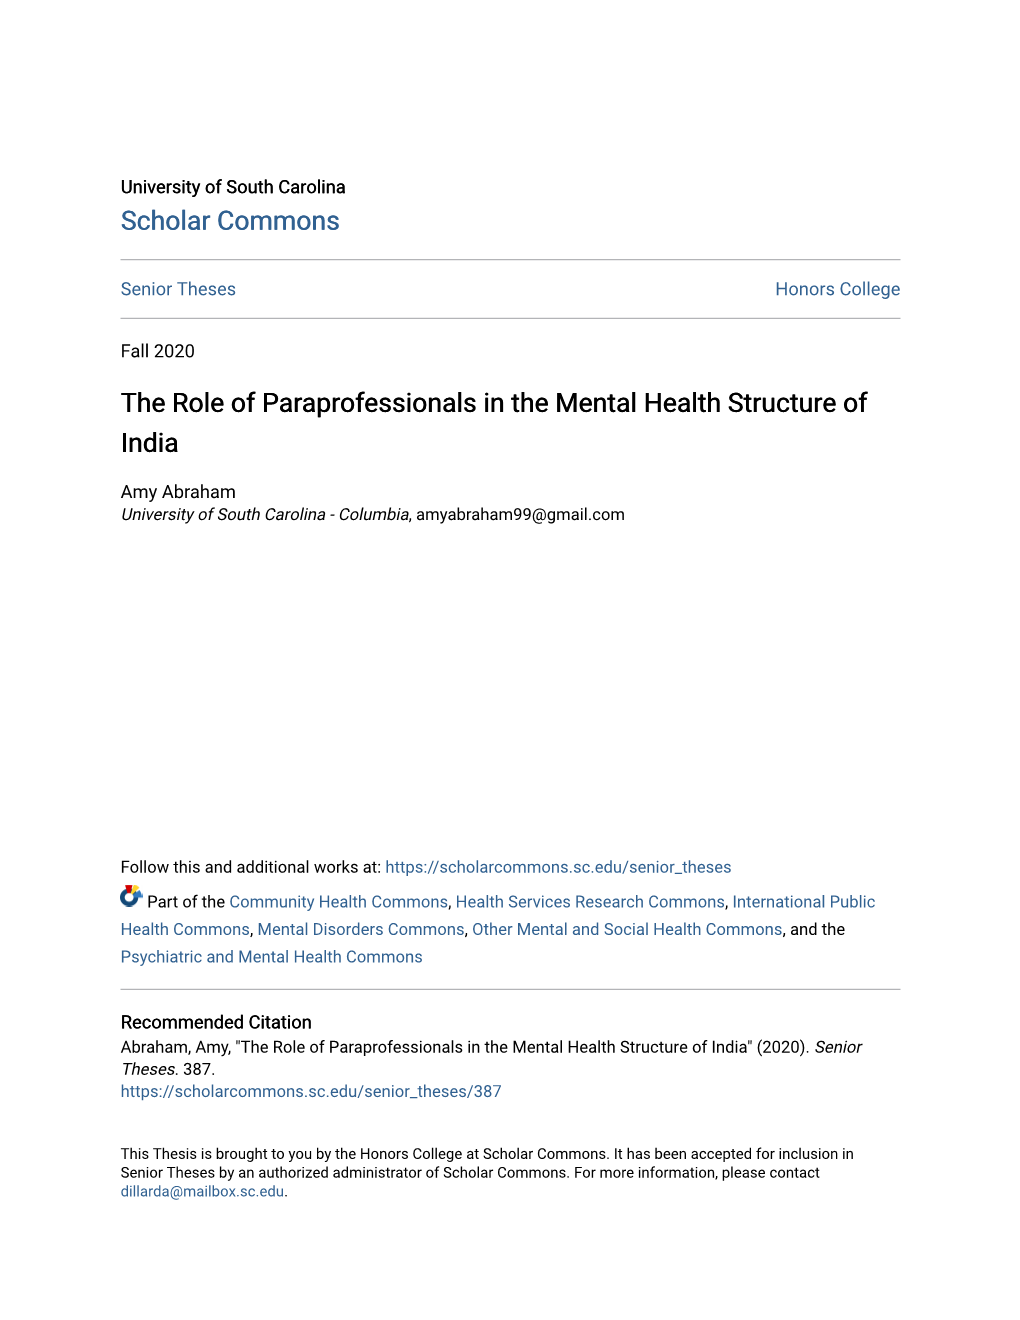 The Role of Paraprofessionals in the Mental Health Structure of India